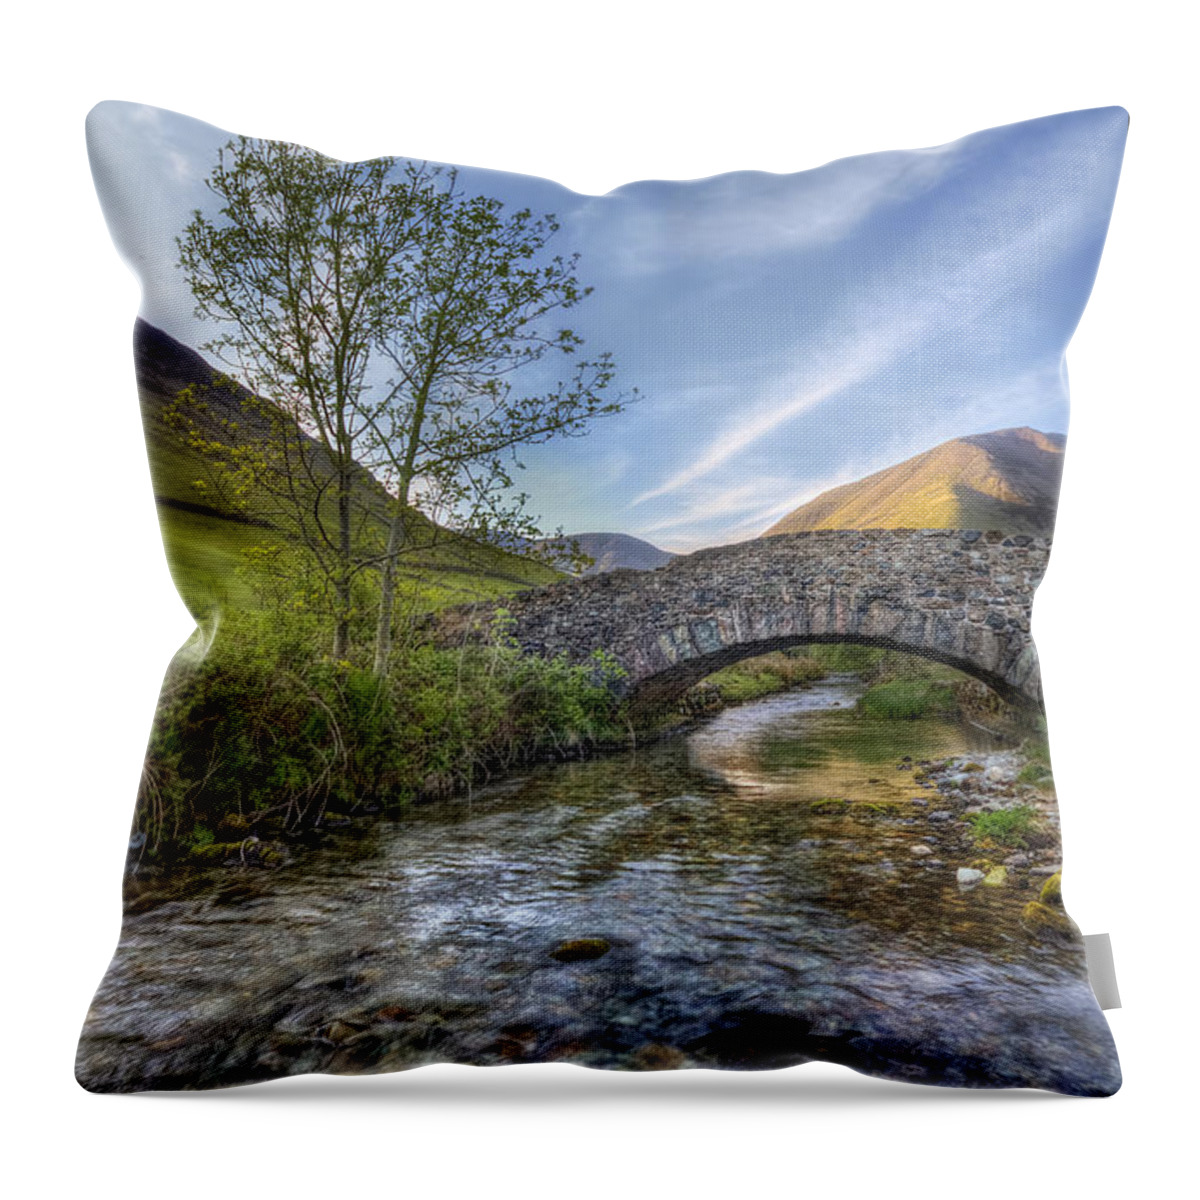 Landscape Throw Pillow featuring the photograph Follow Your Bliss by Evelina Kremsdorf